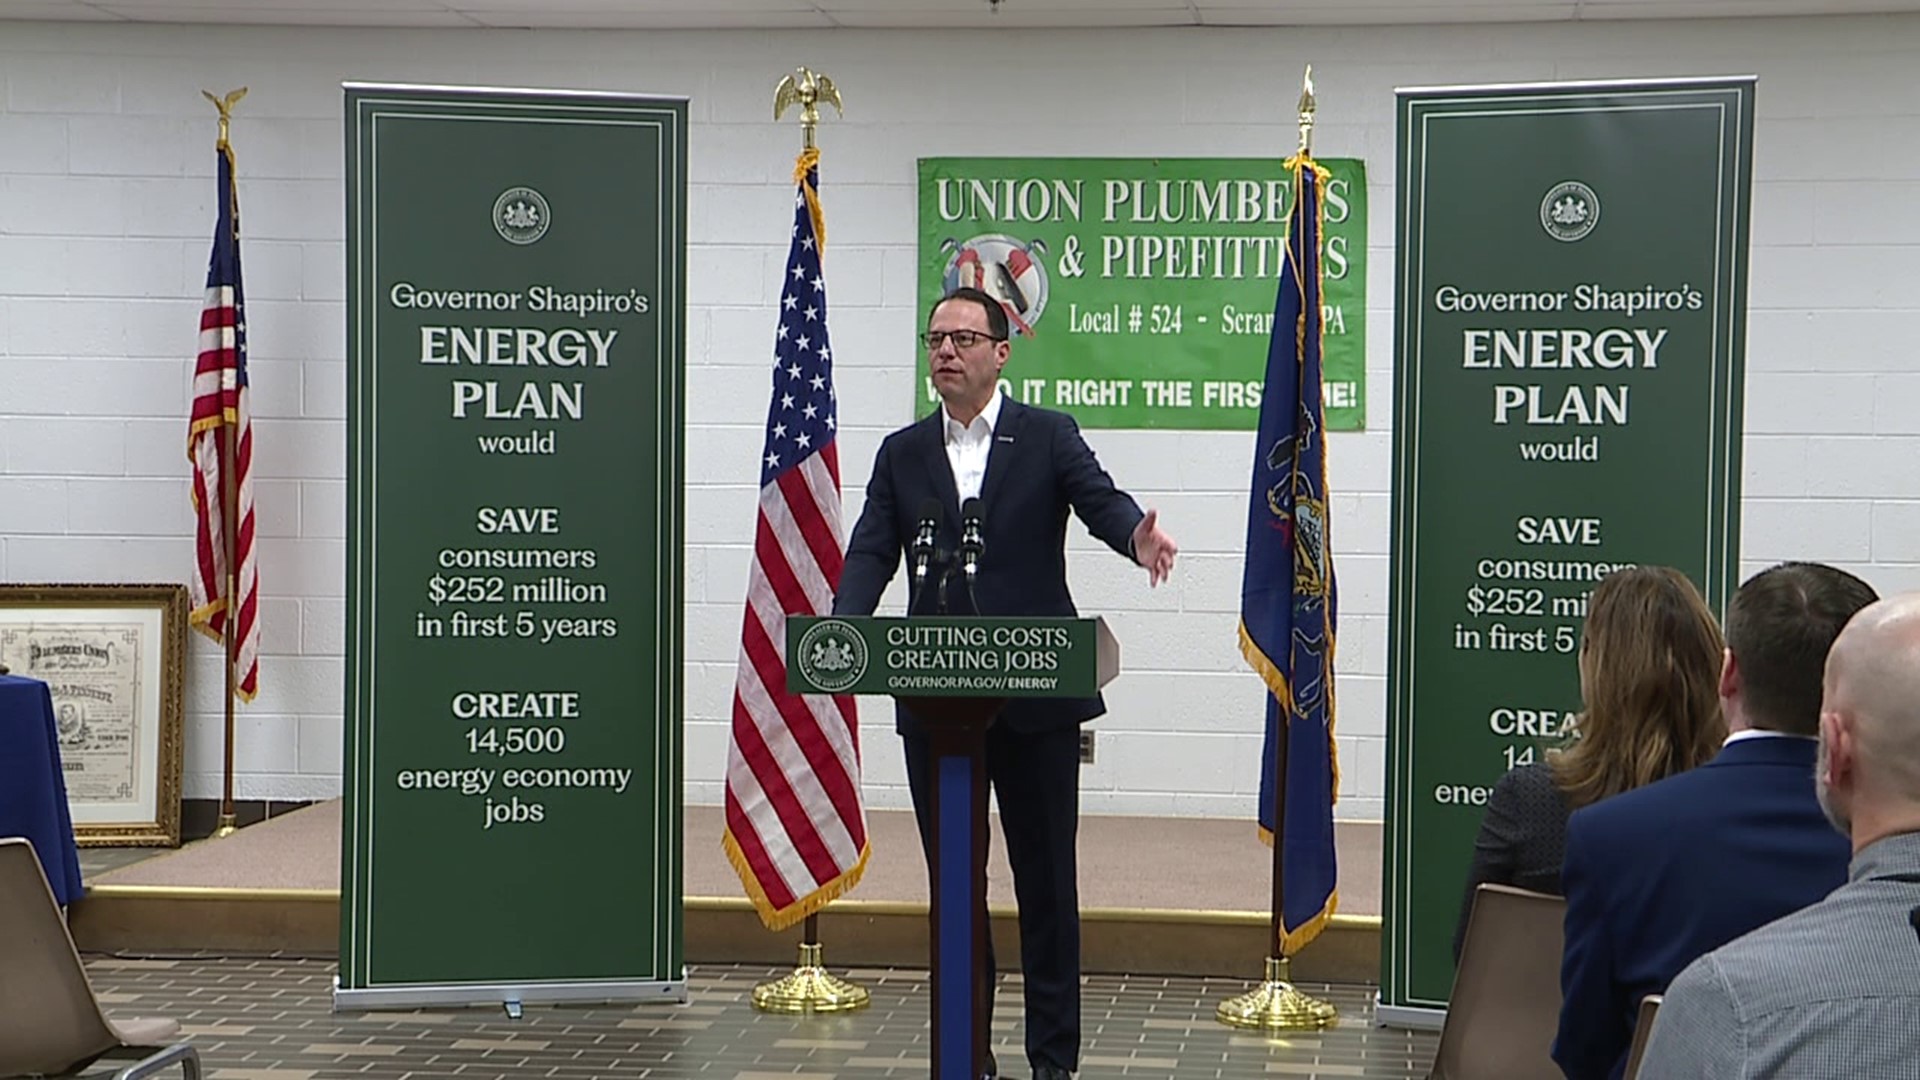 Shapiro announced the plan while making a visit to the Pipe Fitters Union office in Scranton.